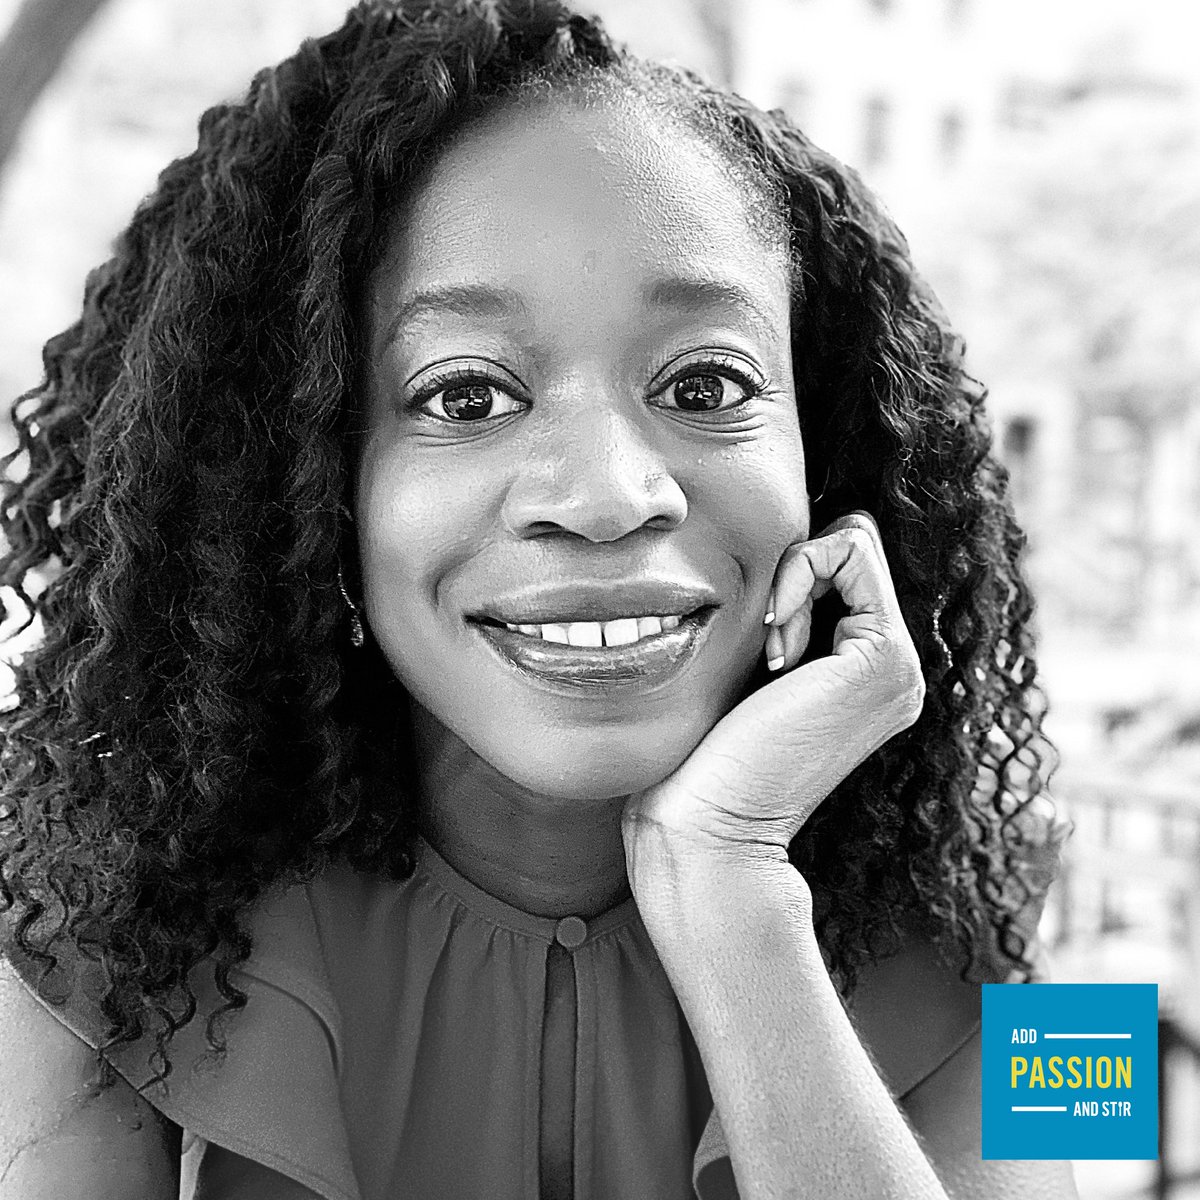 Join us as we dive into an insightful conversation with @jamilarobinson, @bonappetit's remarkably visionary Editor-in-Chief, in the latest episode of @addpassionstir. Listen here: bit.ly/3Q62Gff#AddPas… #BonAppetit